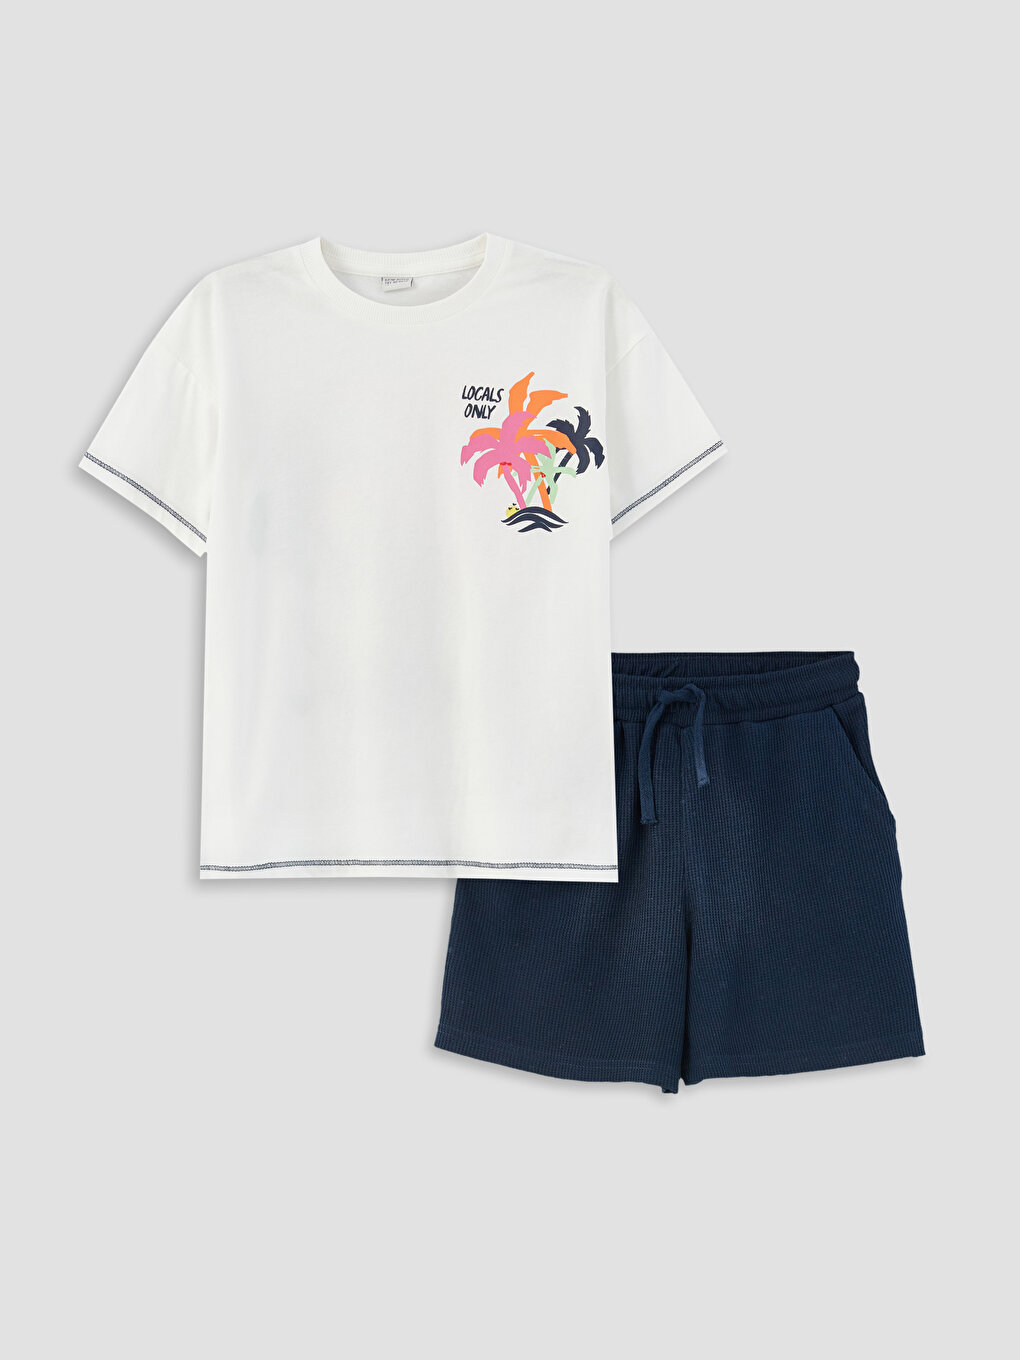 Relaxed Fit Crew Neck Boy's T-Shirt and Shorts -S3EB62Z4-FDU 